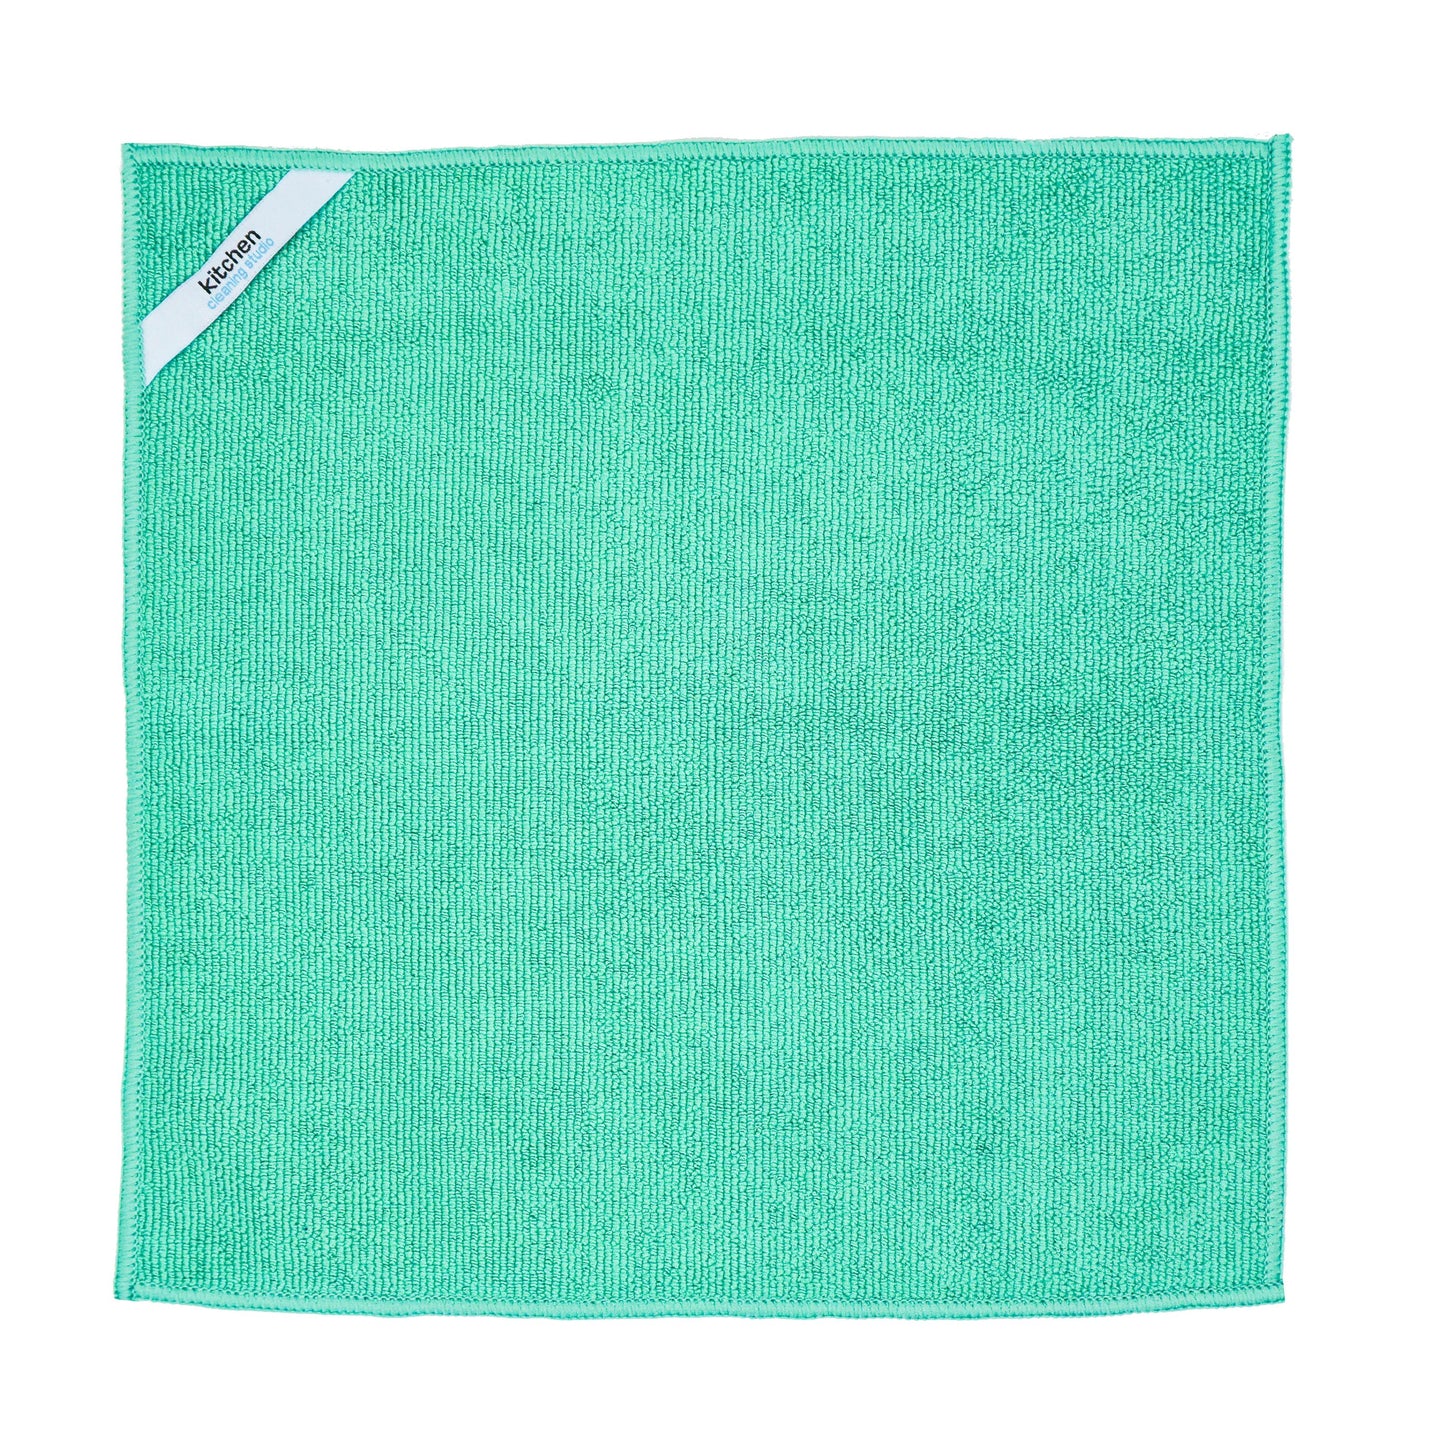 Microfiber Cleaning Cloth - Kitchen Kit (3-Pack)